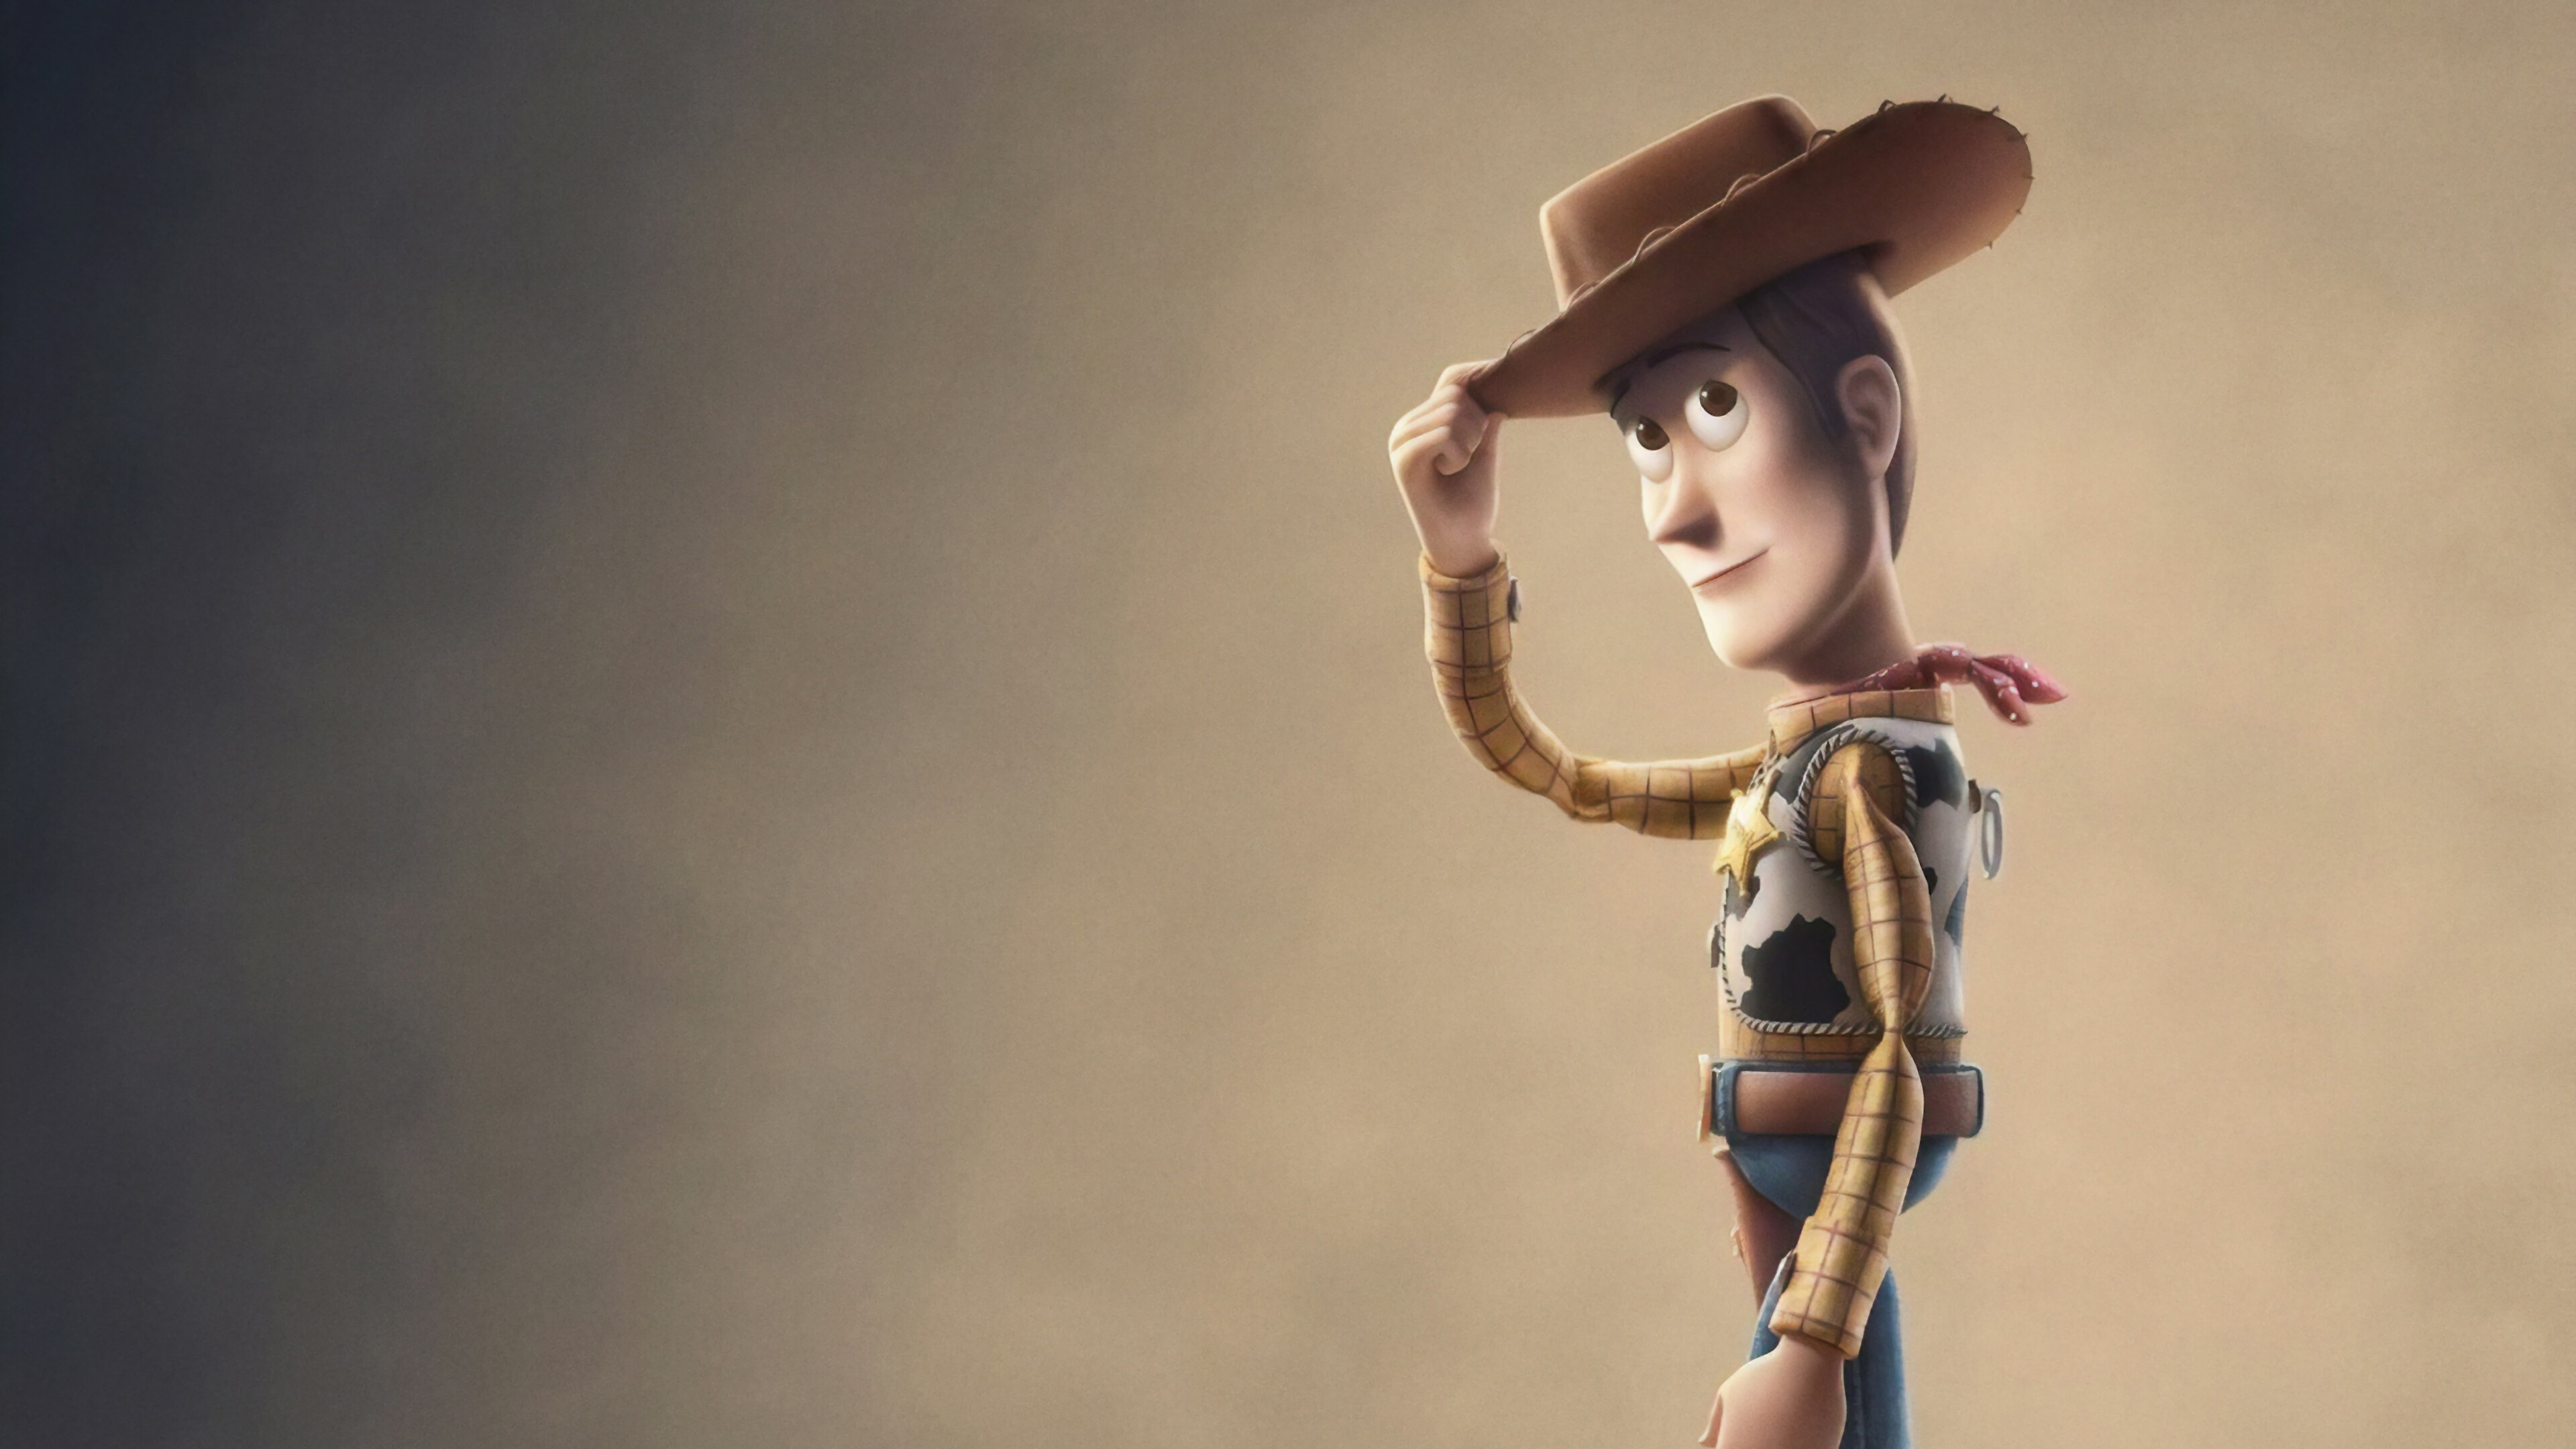 Woody from Toy Story 4, 4k wallpaper, Captivating character, Toy world adventure, 3840x2160 4K Desktop